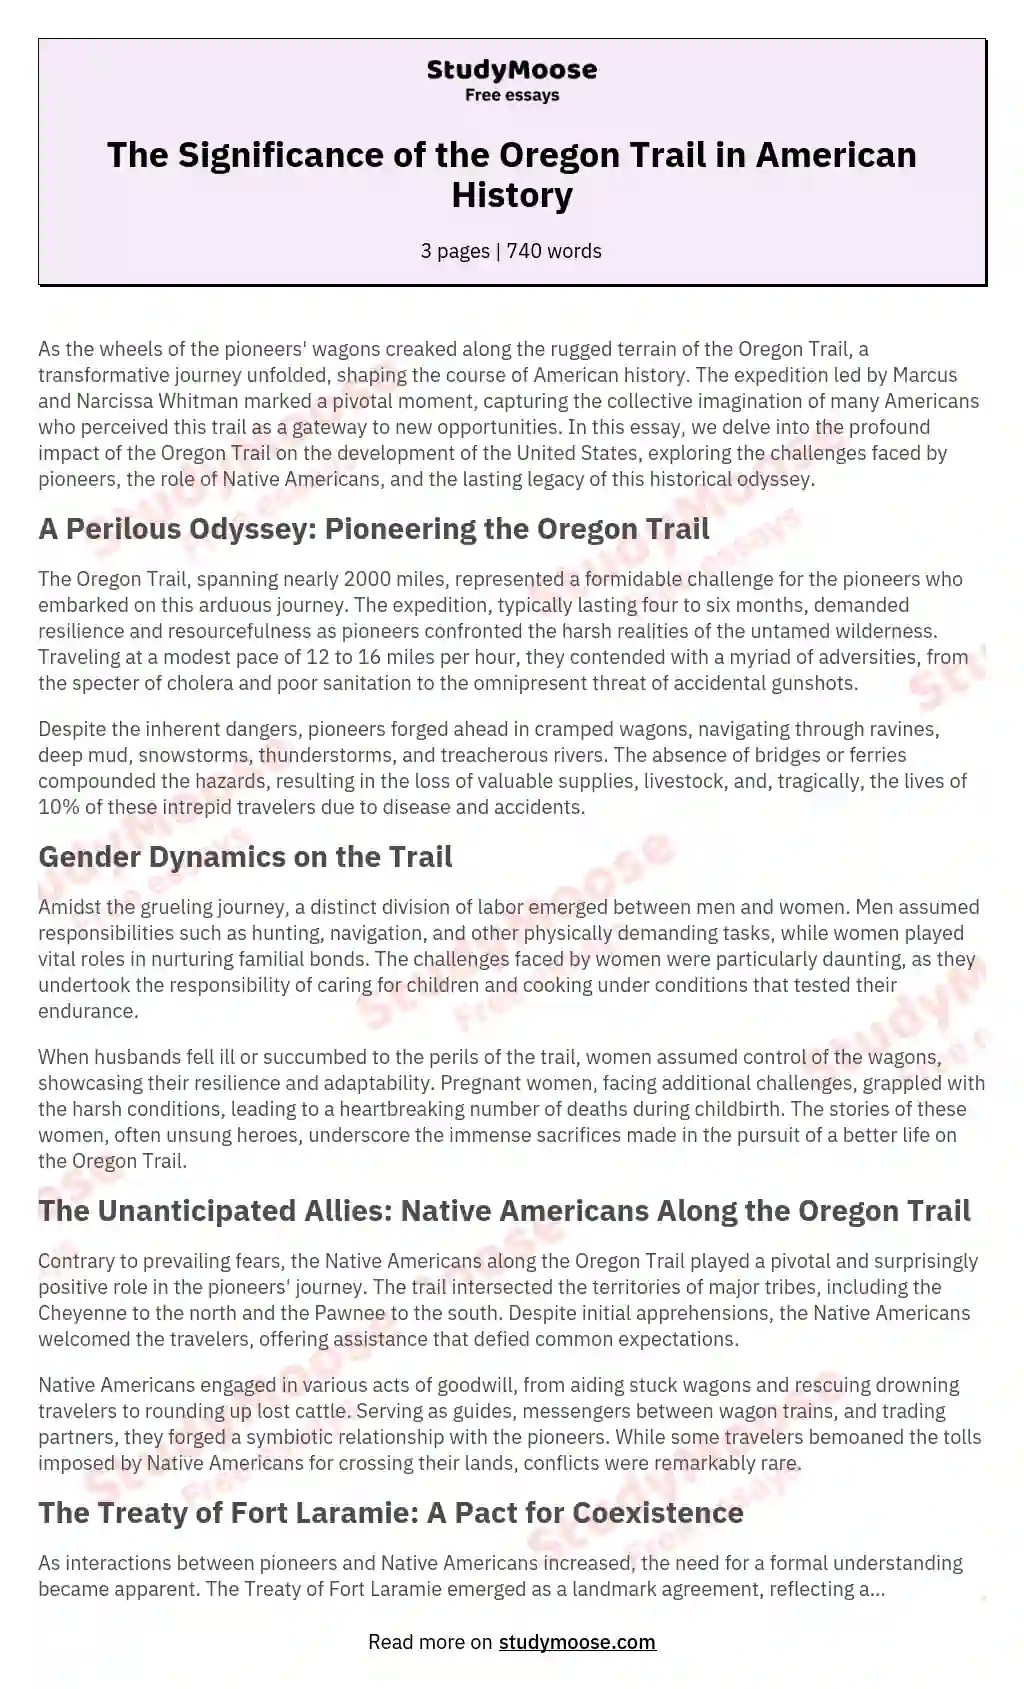 The Significance of the Oregon Trail in American History essay